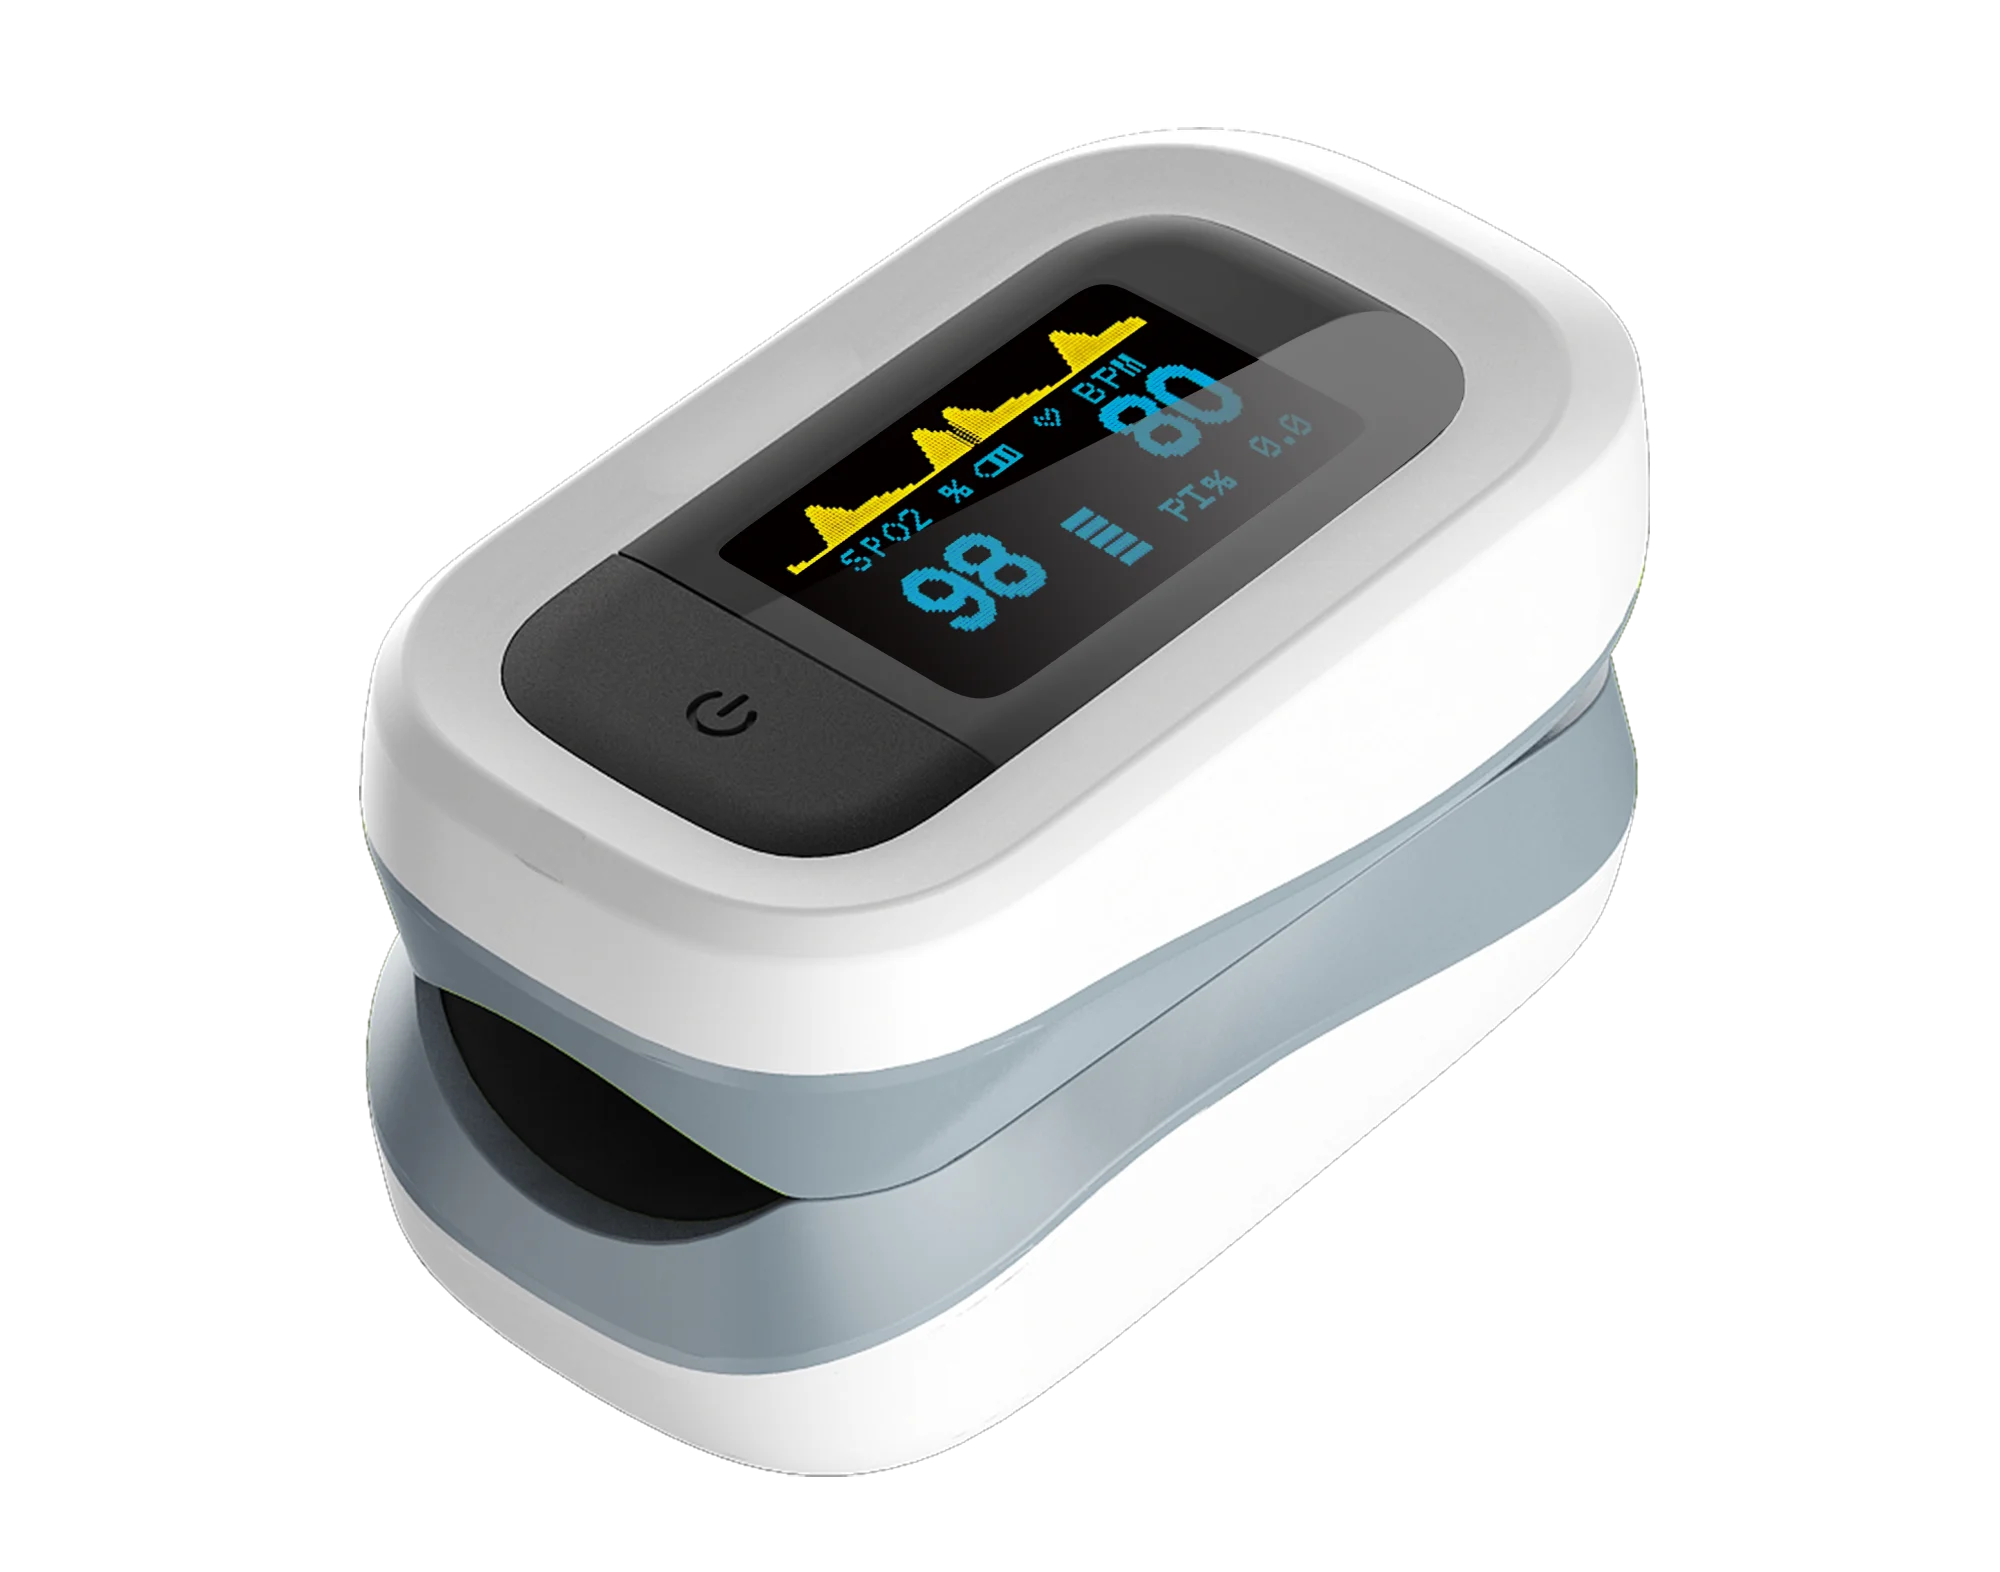 yonker measured spo2 and pulse rate data record pulse oximeter